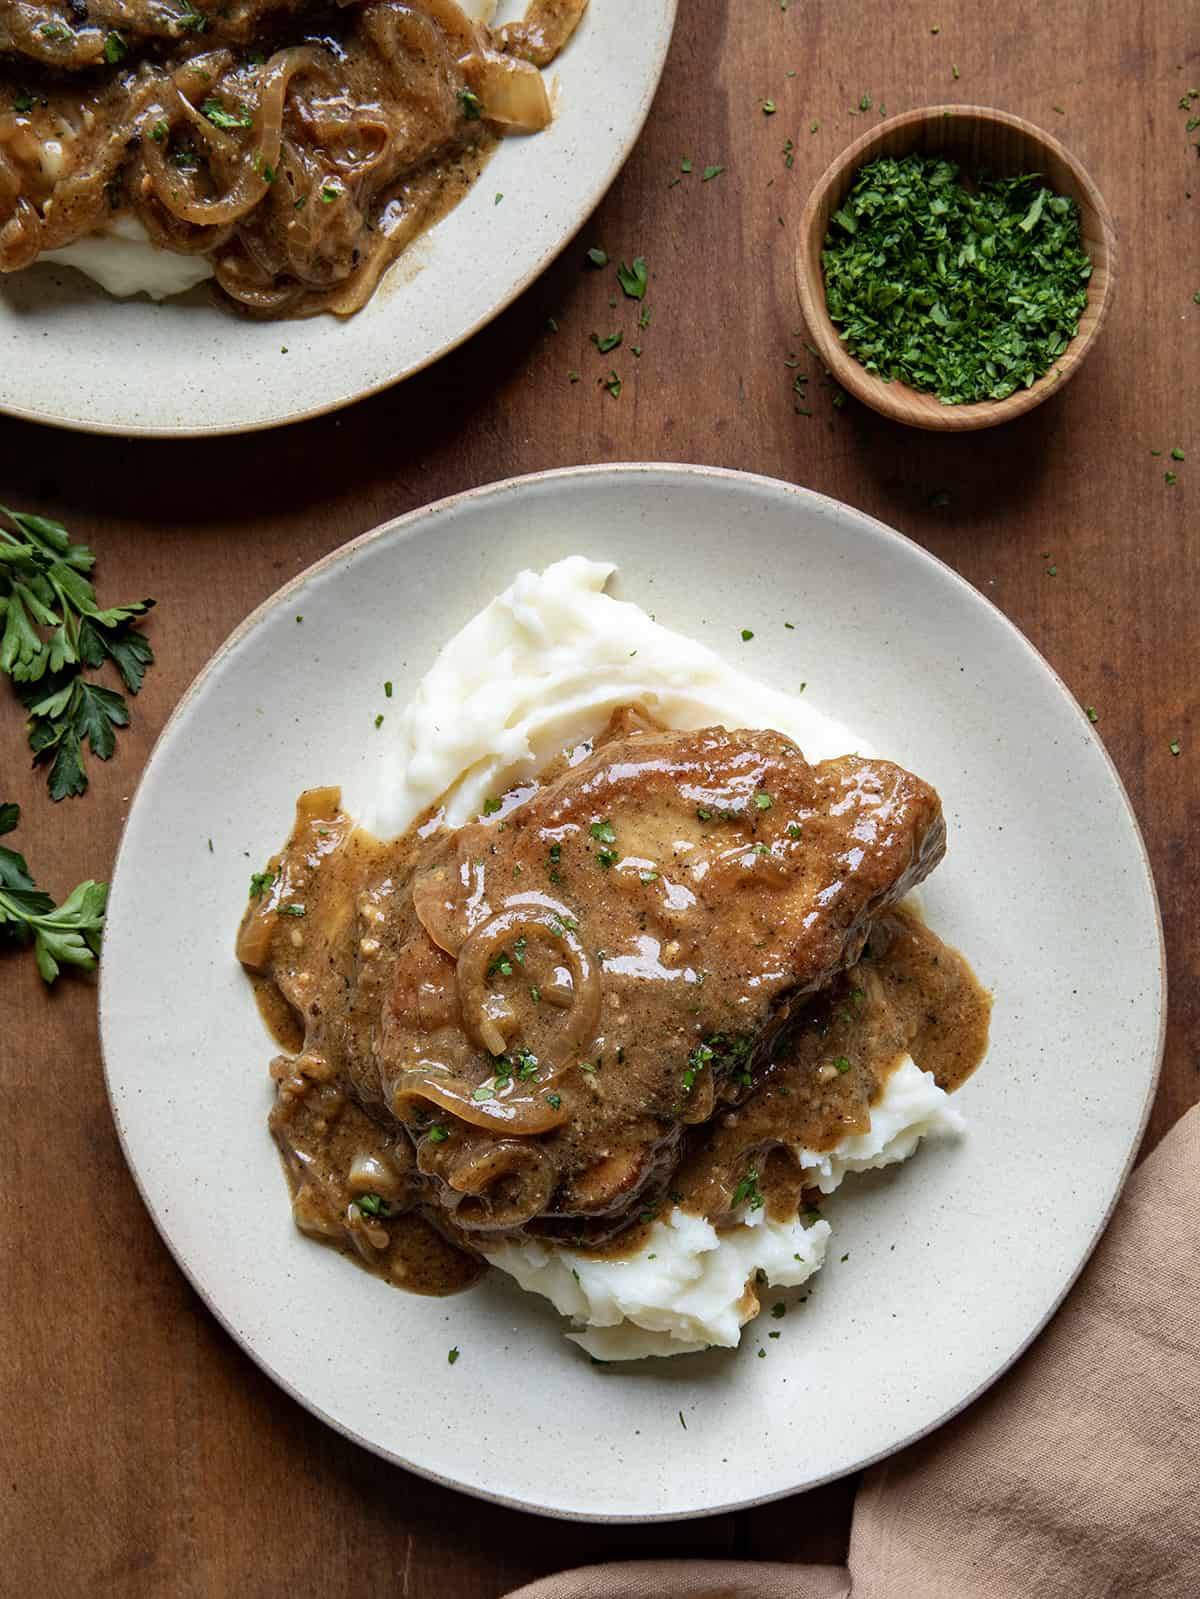 One Smothered Pork Chop on a bed of mashed potatoes on a plate.